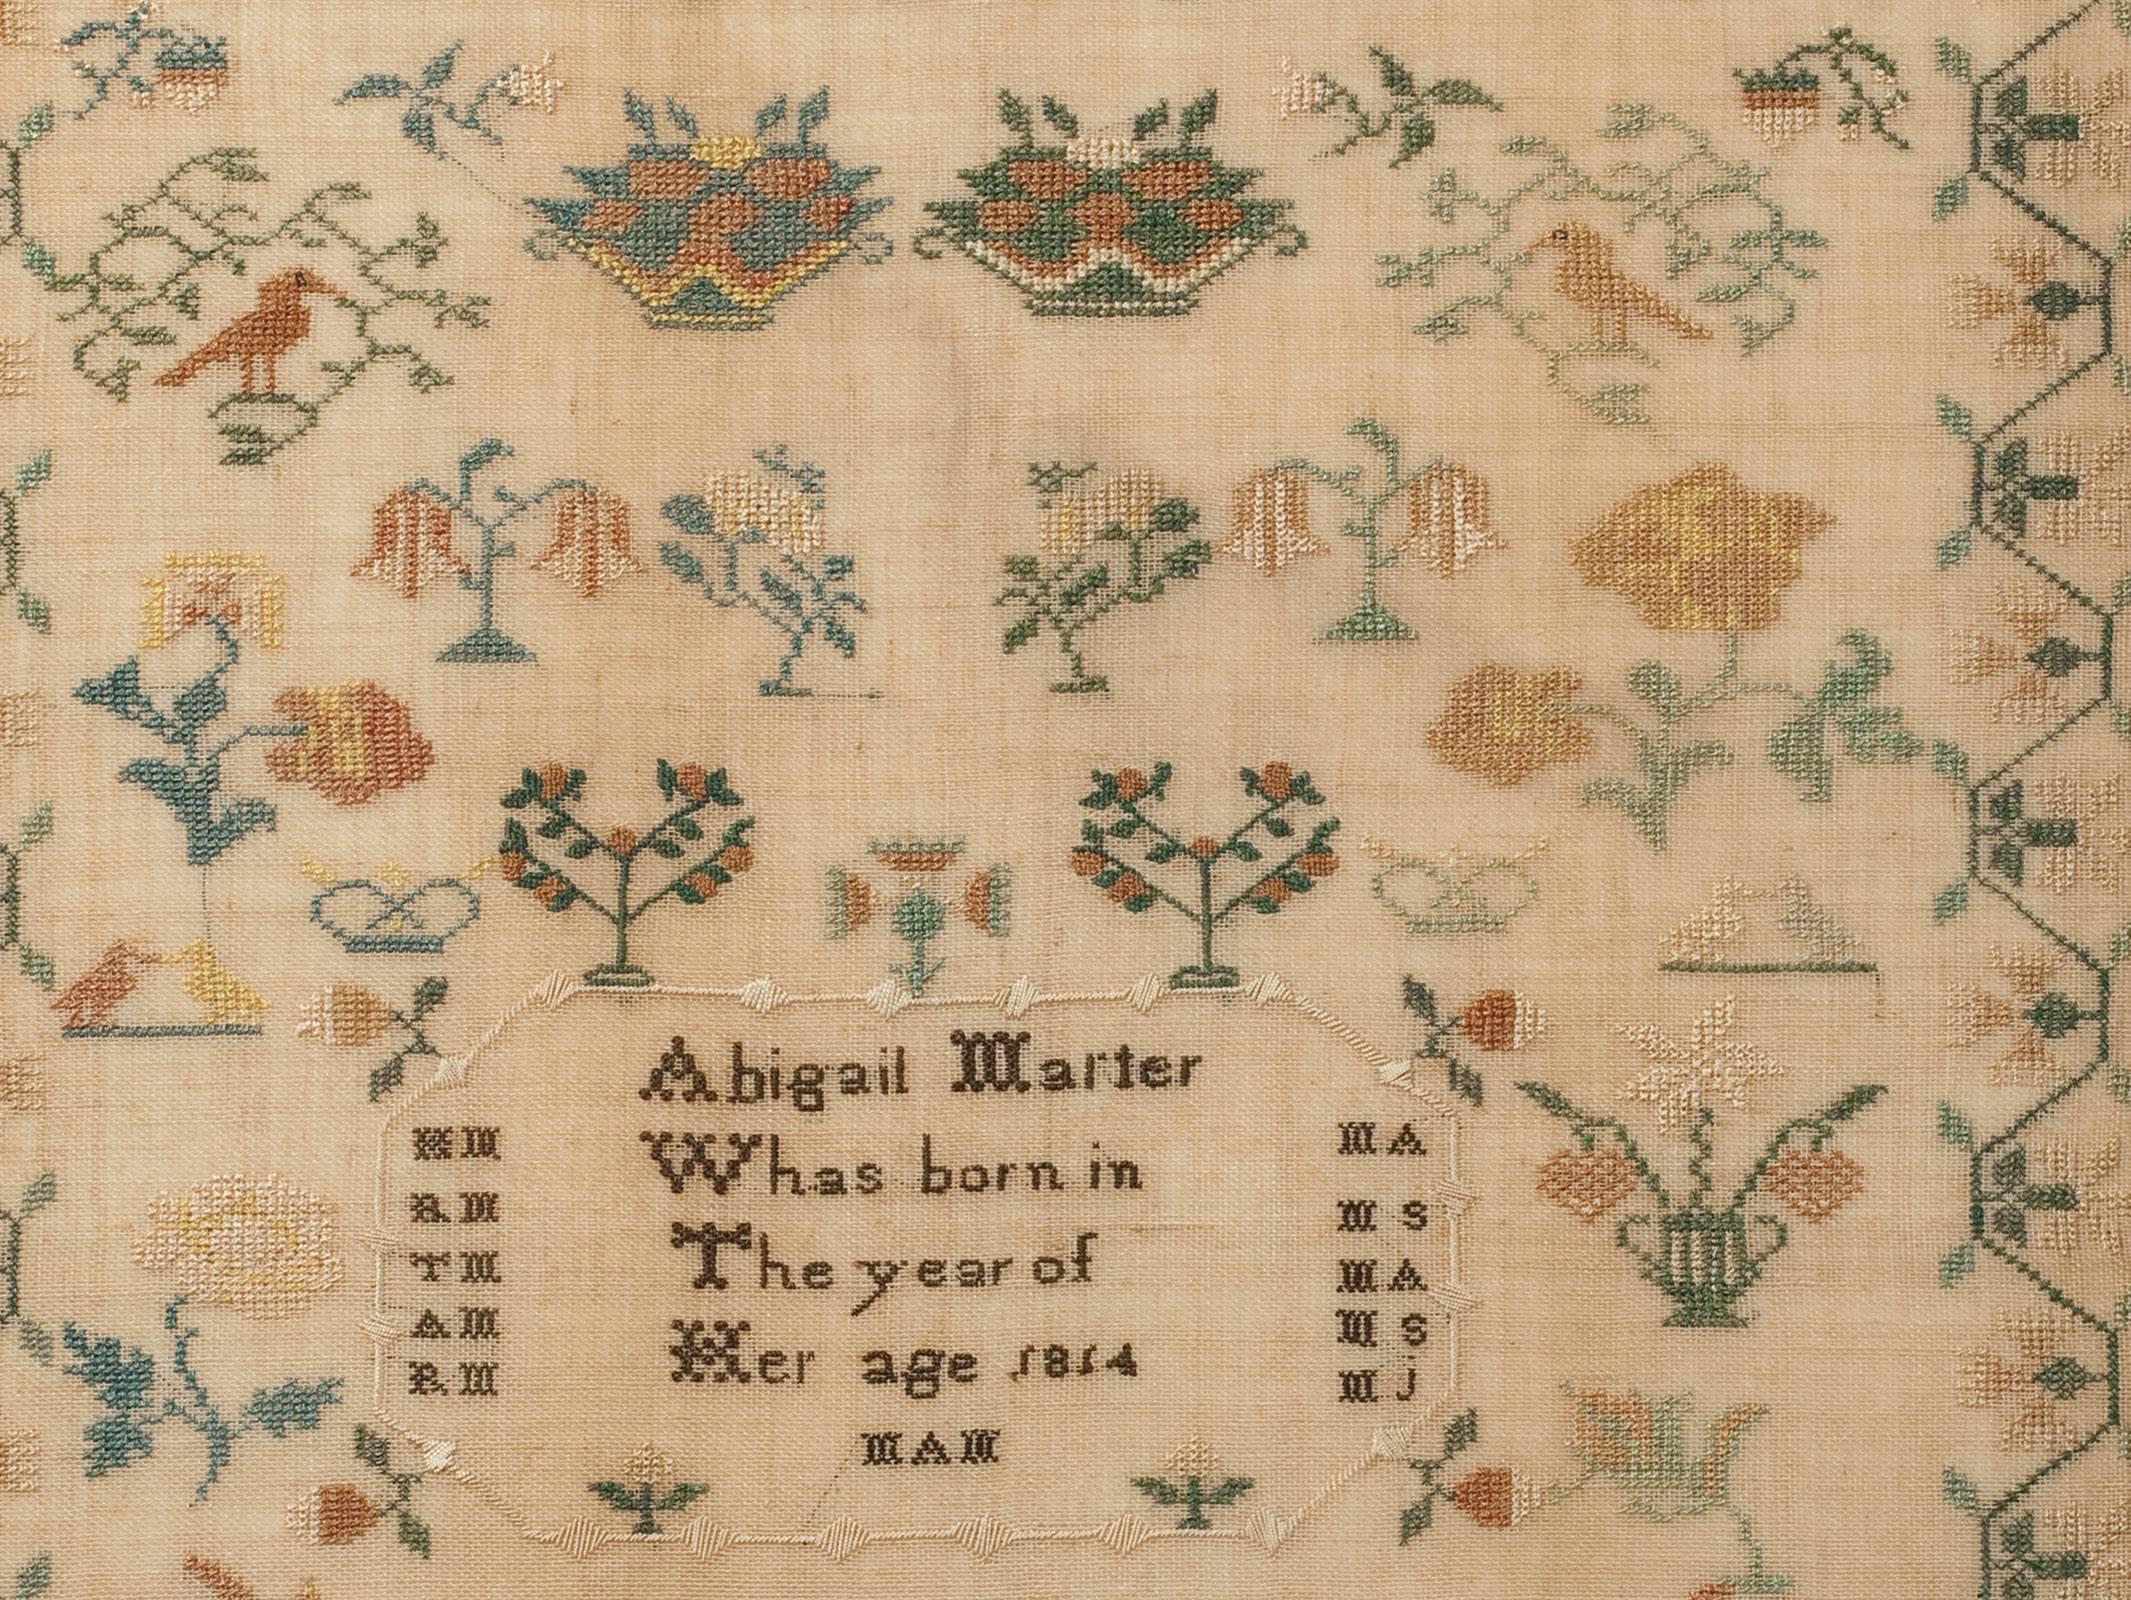 The pictorial samplers made in Burlington County, New Jersey in the first three decades of the 19th century form one of the most significant of all groups of American samplers. They often feature balanced compositions of well-developed house and